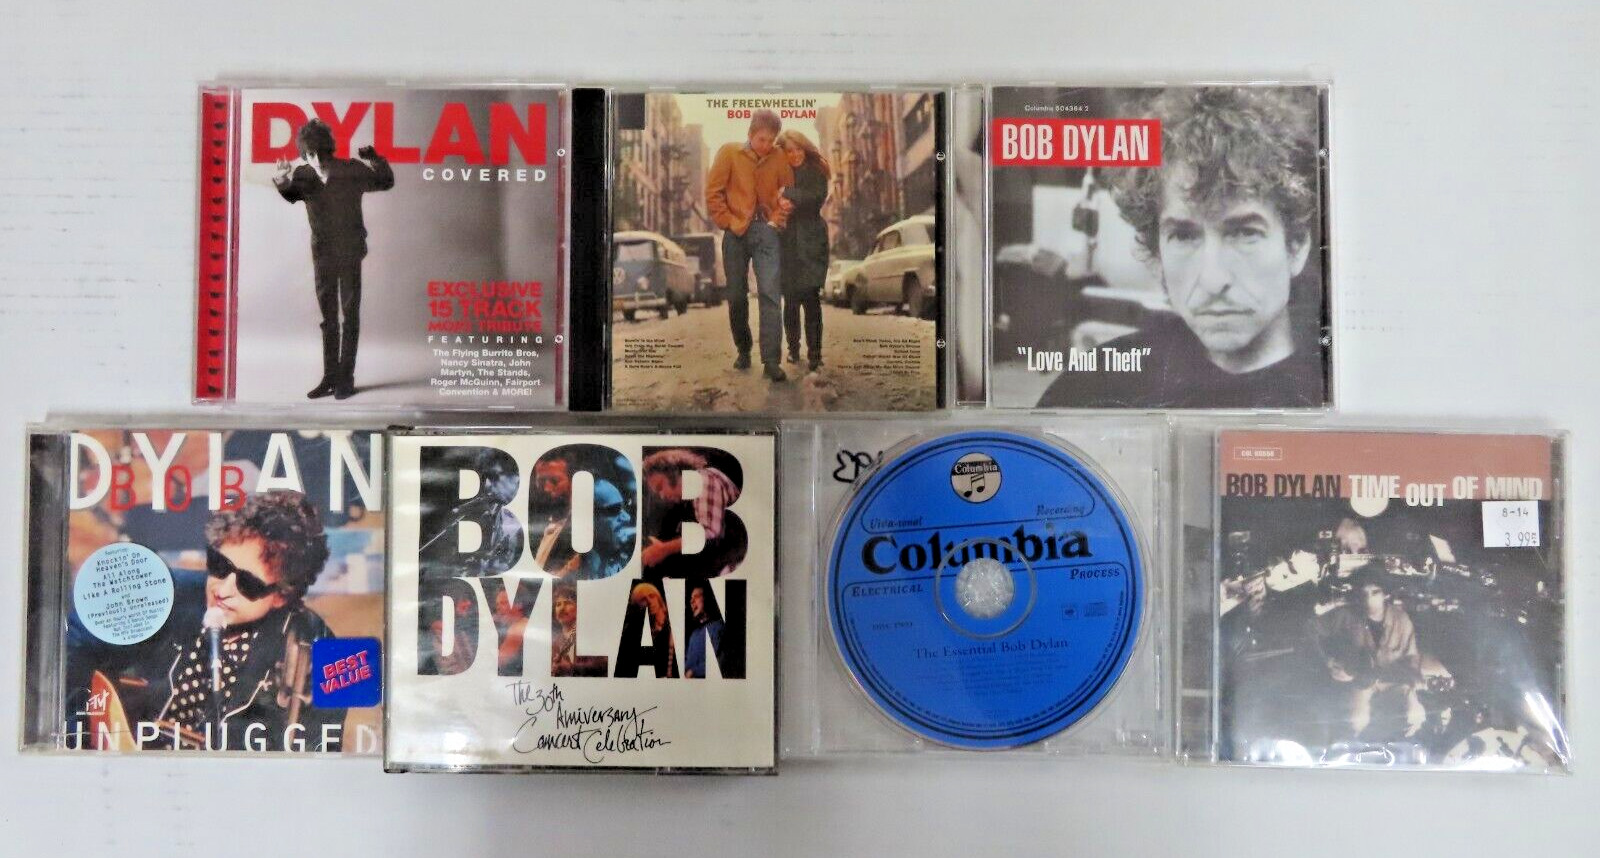 LOT OF 7 BOB DYLAN COVERED, FREEWHEELIN, LOVE THEFT - CDS MUSIC ALBUM LOT TESTED